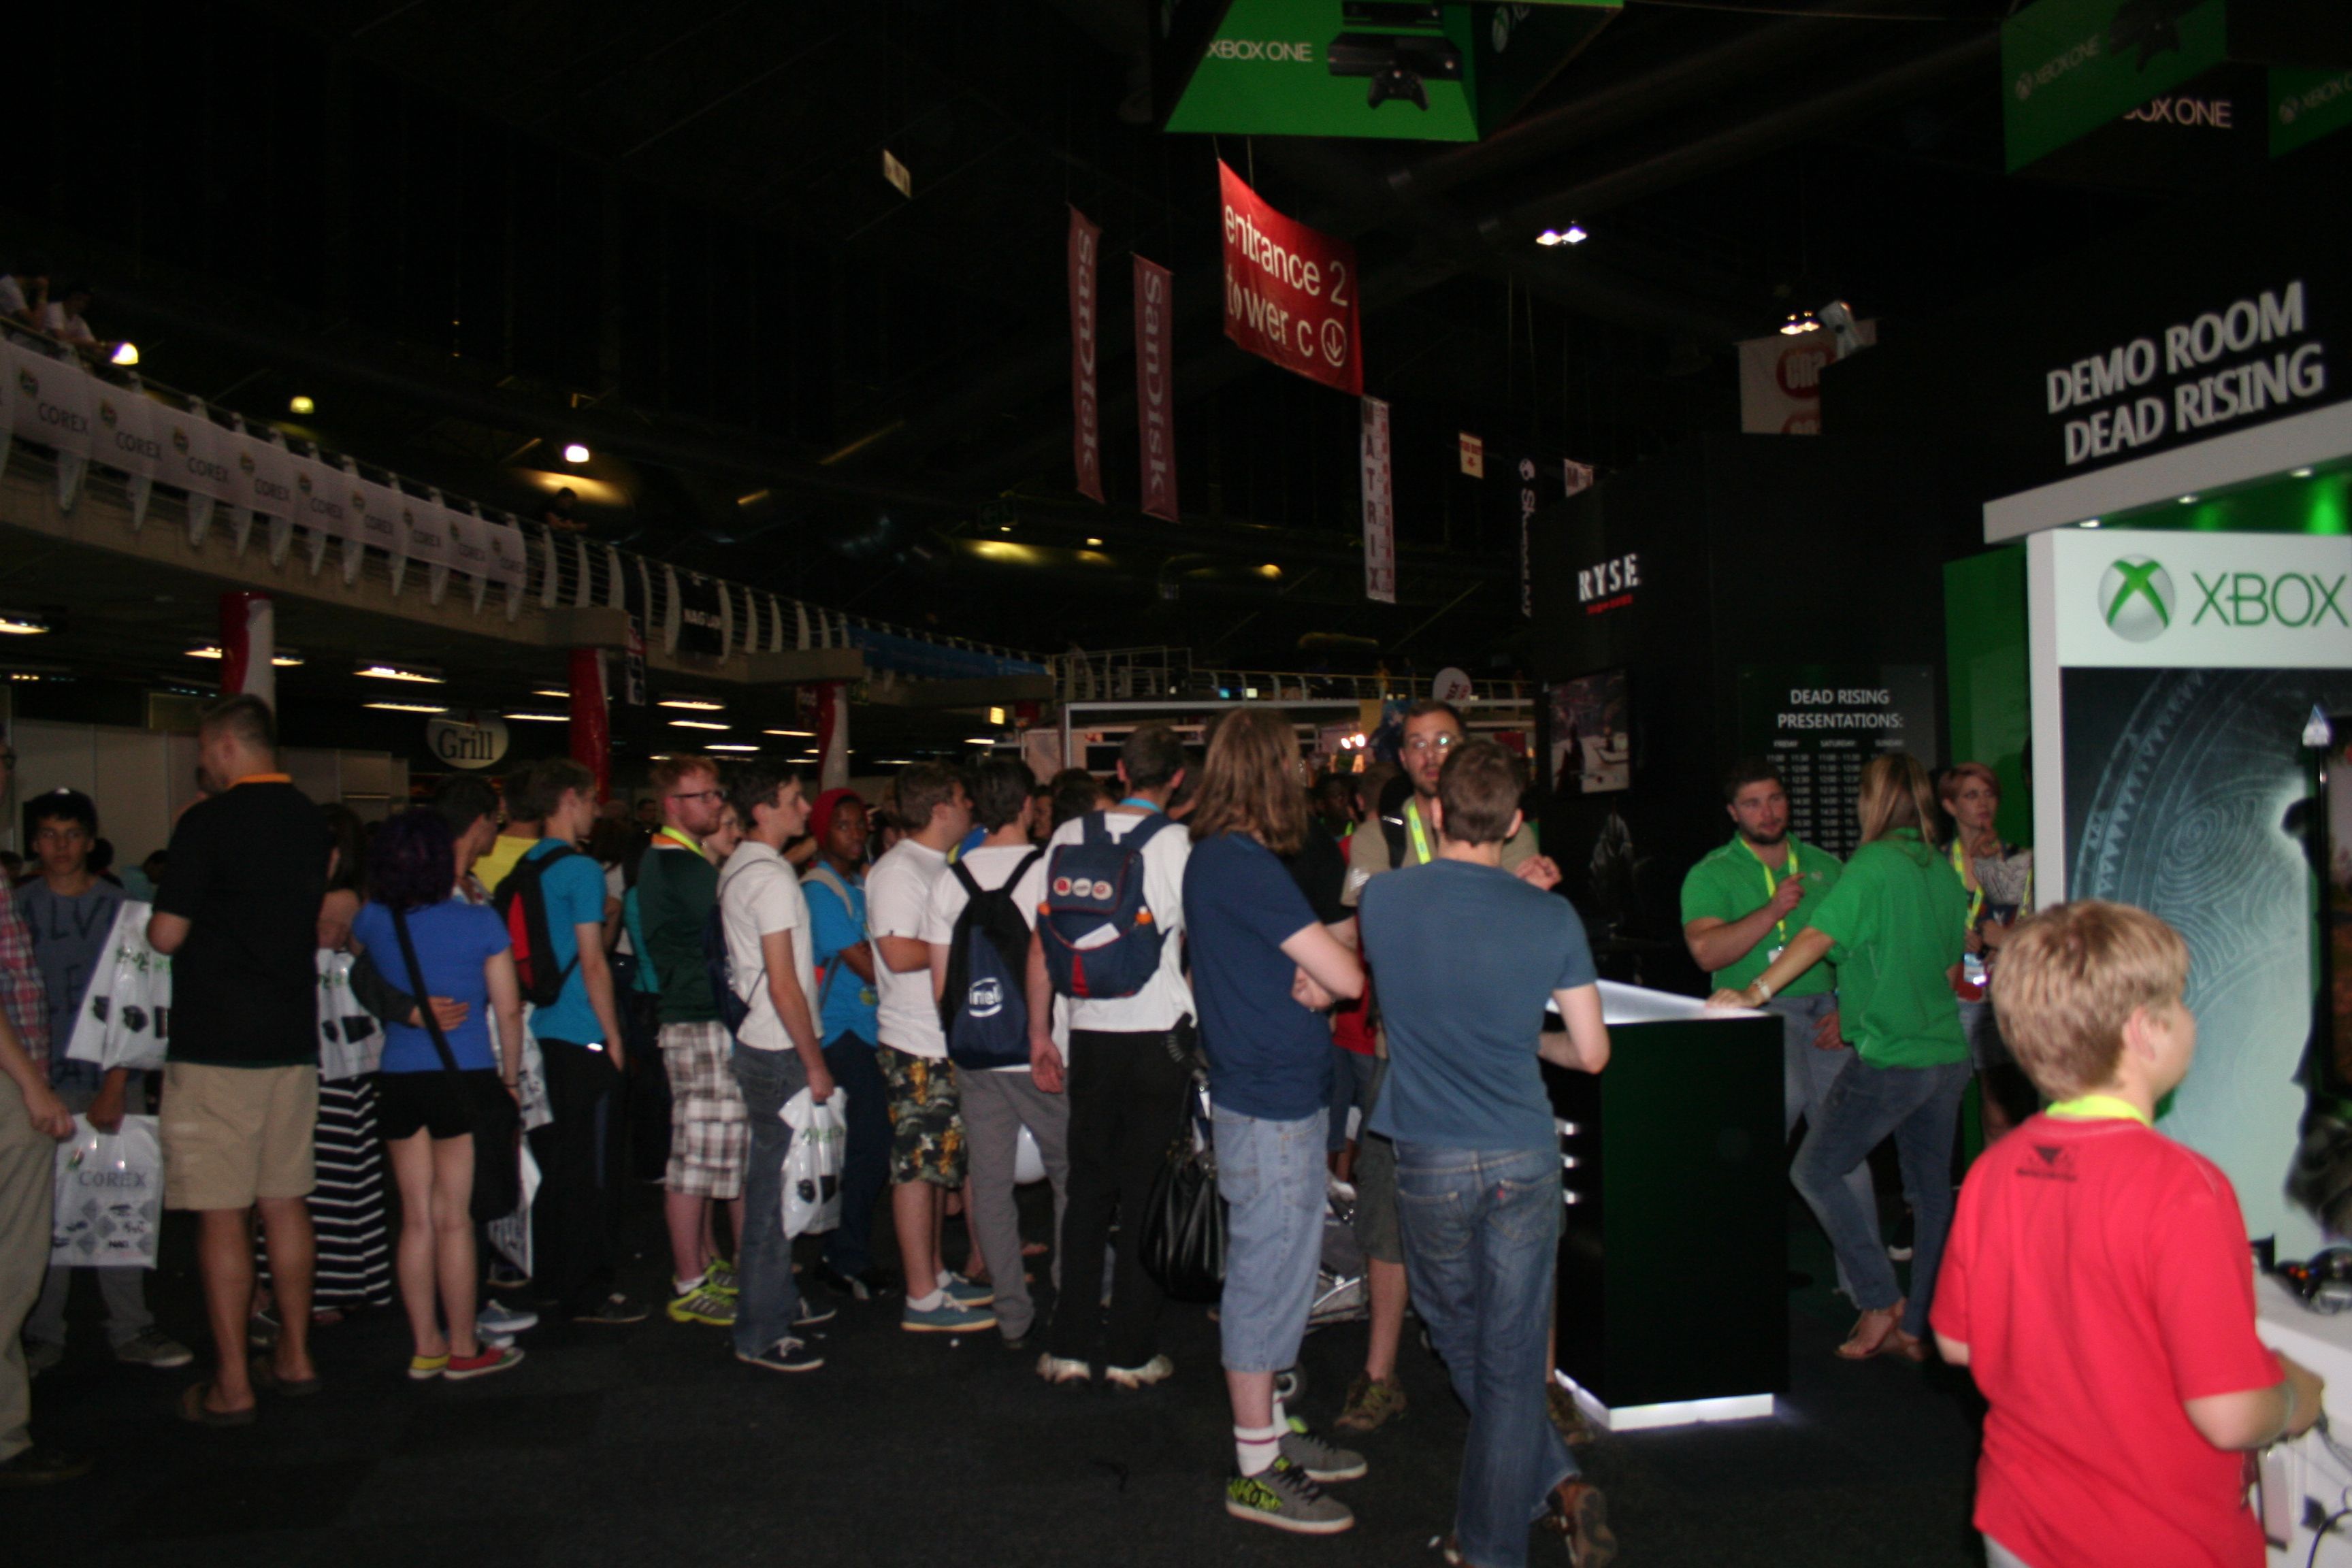 This is how the queues looked for Ryse